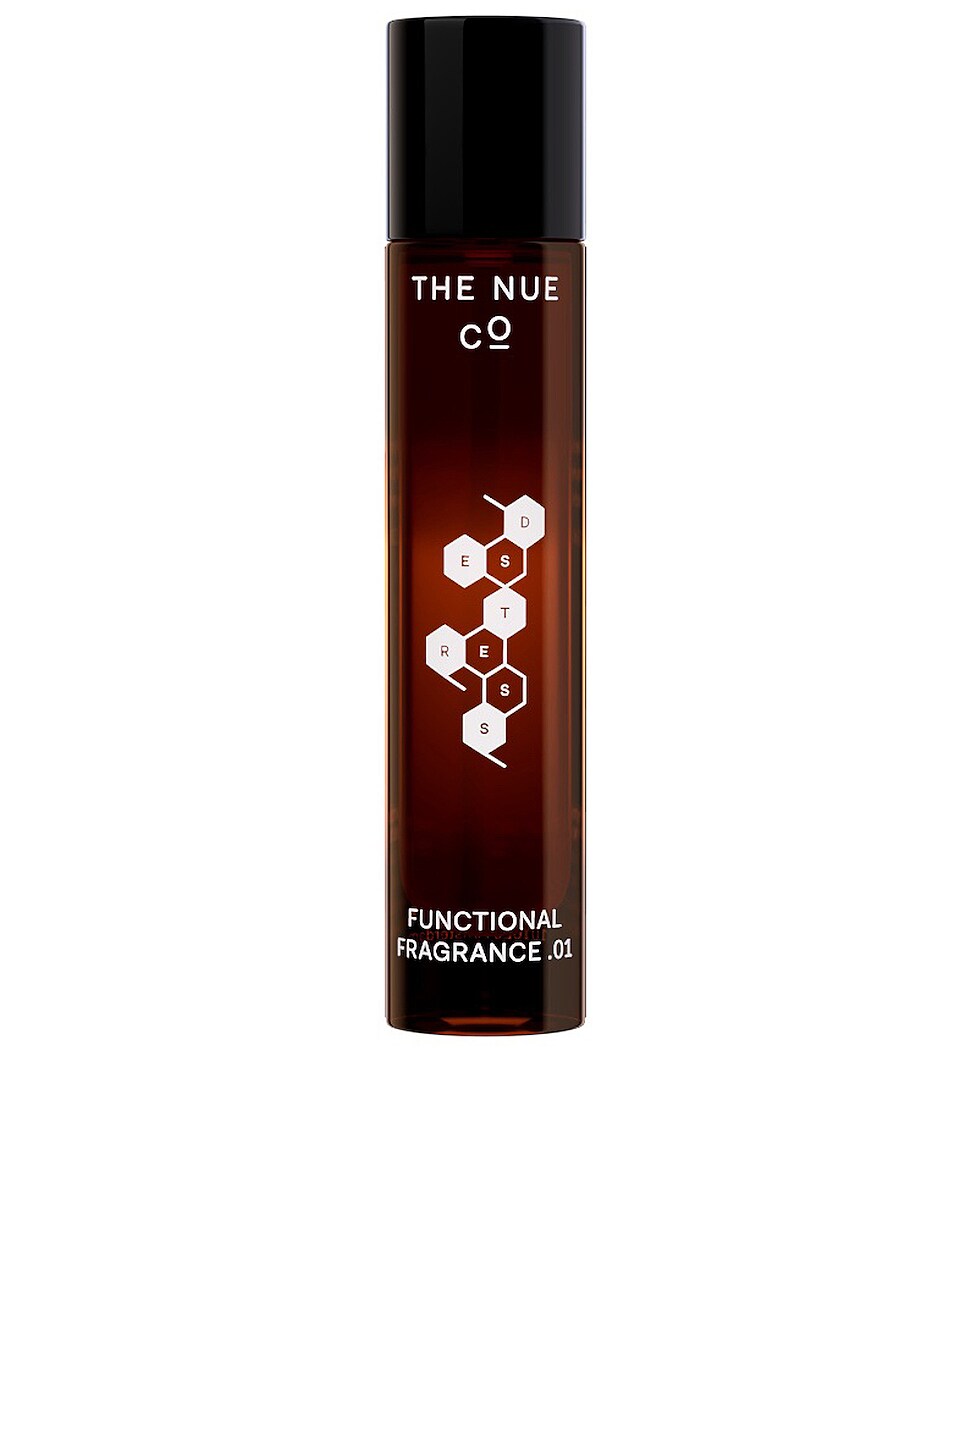 The Nue Co Functional Fragrance, 10ml In N,a